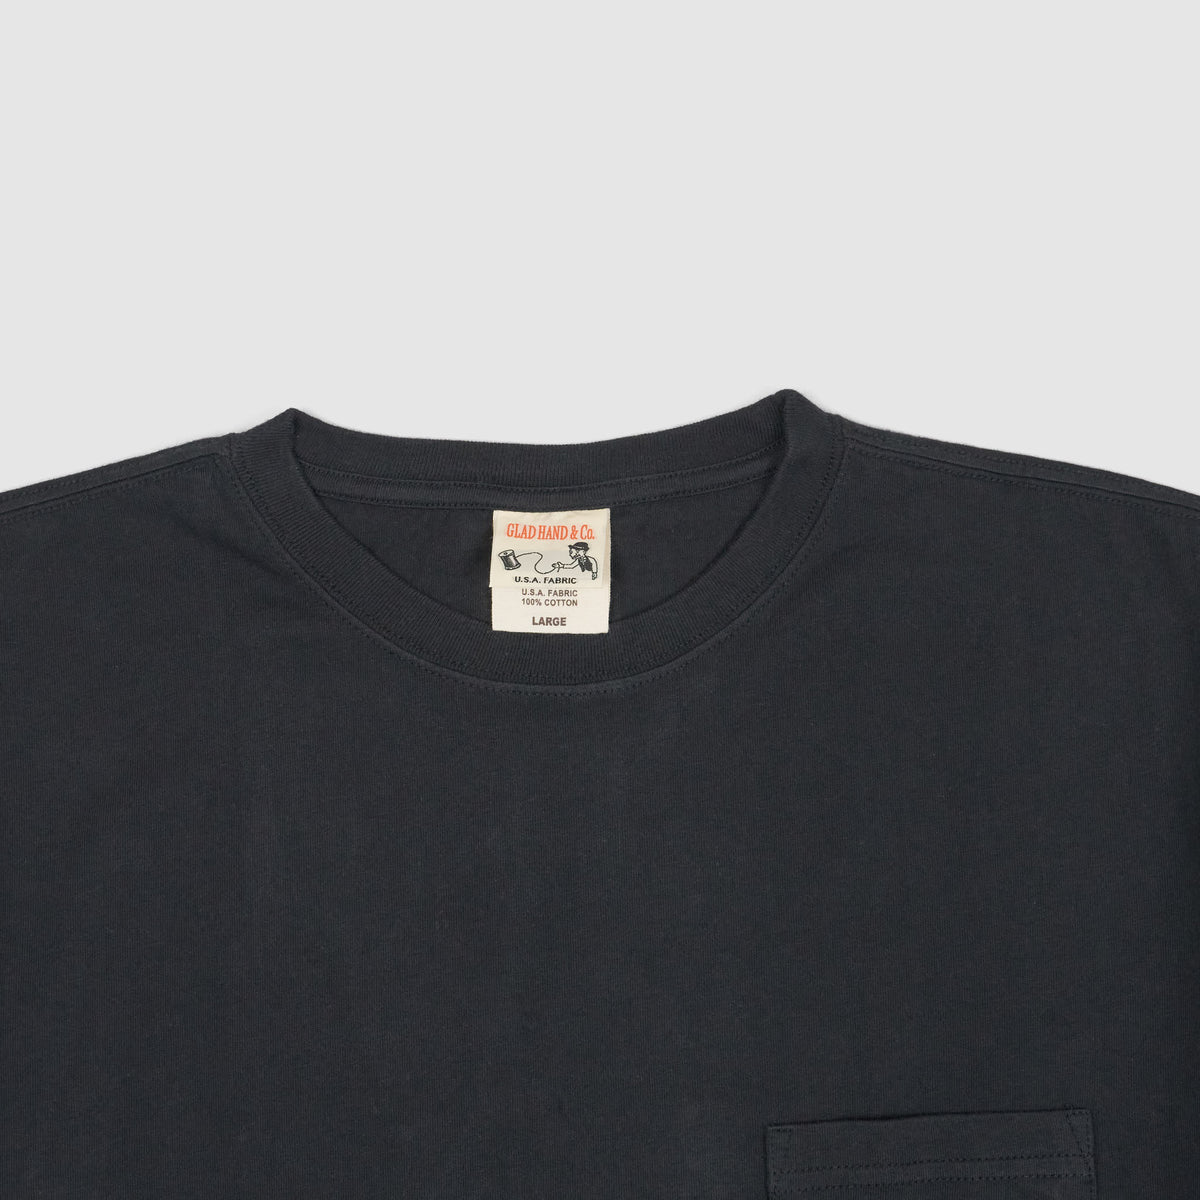 Old Crow Speed Shop by Glad Hand &amp; Co.Crew Neck Pocket T-Shirt